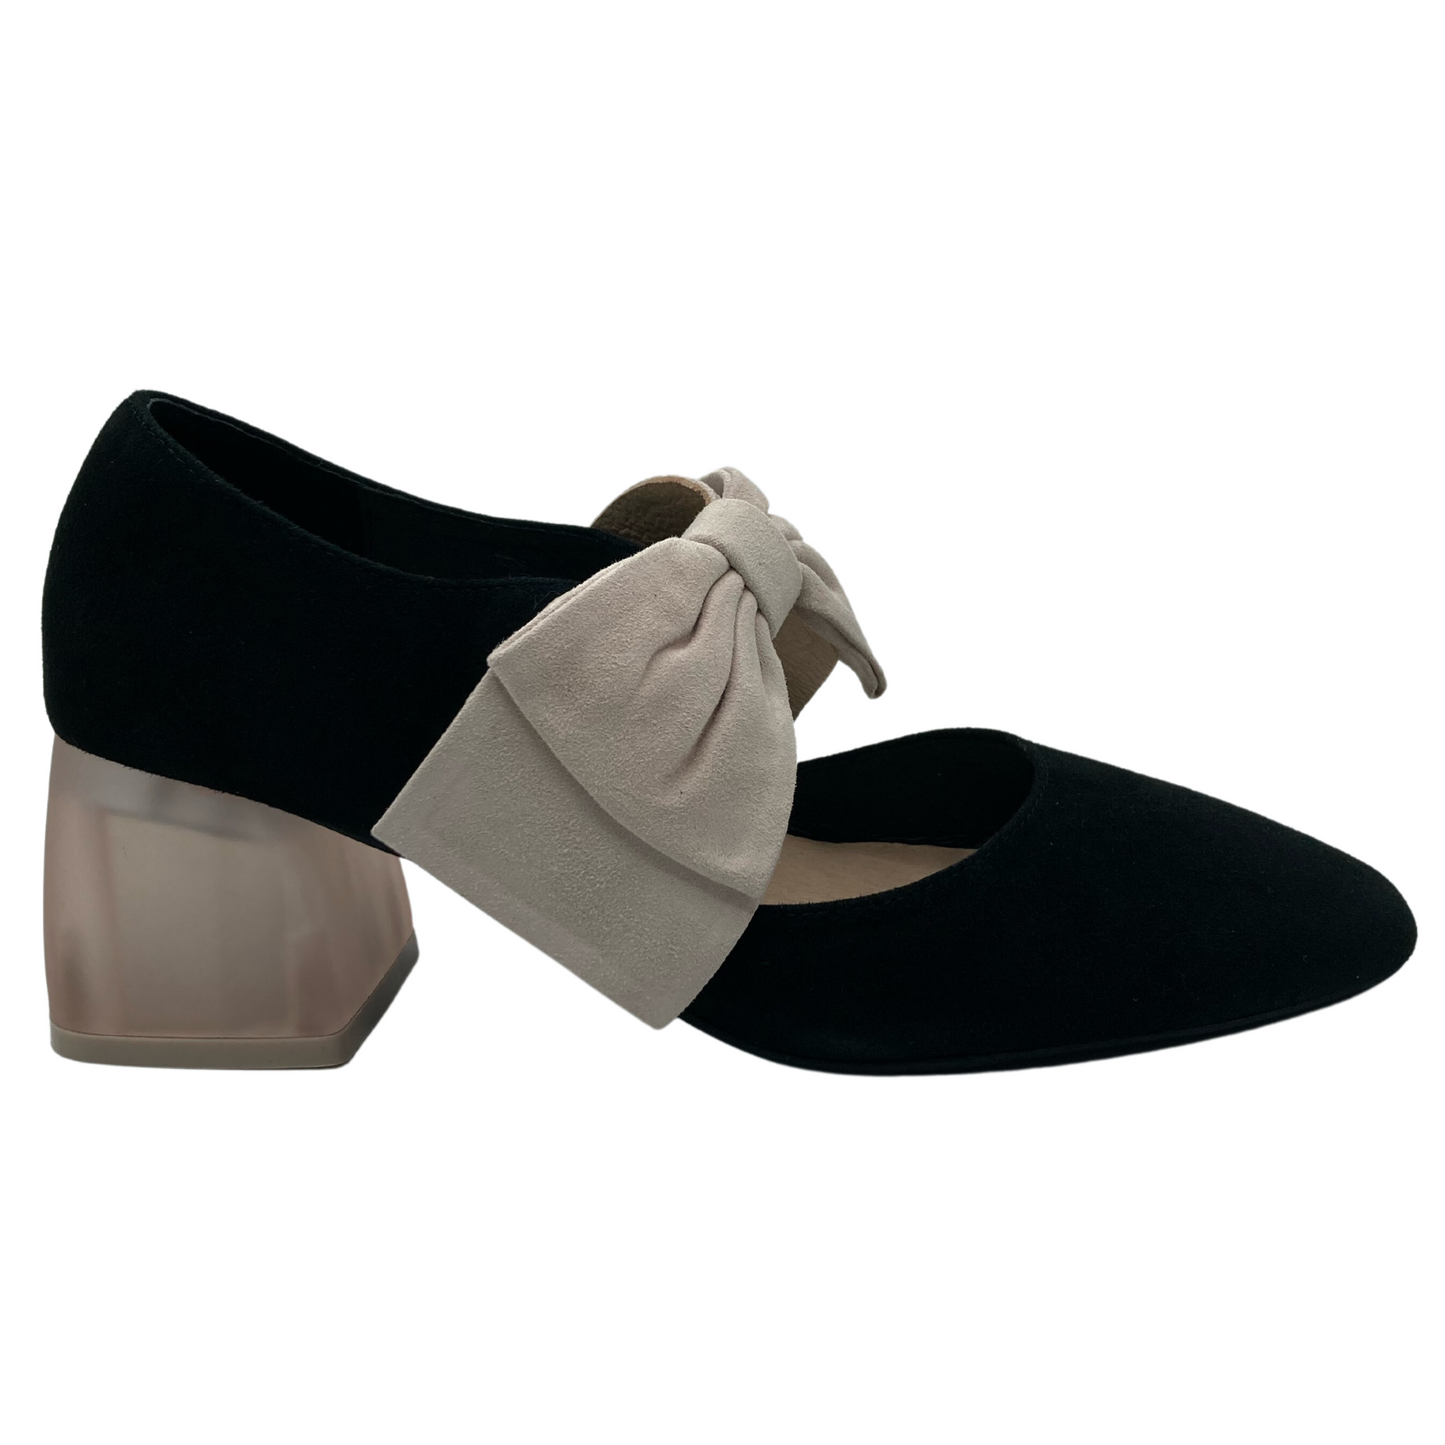 Right facing view of black and vanilla coloured heel with lucite block heel